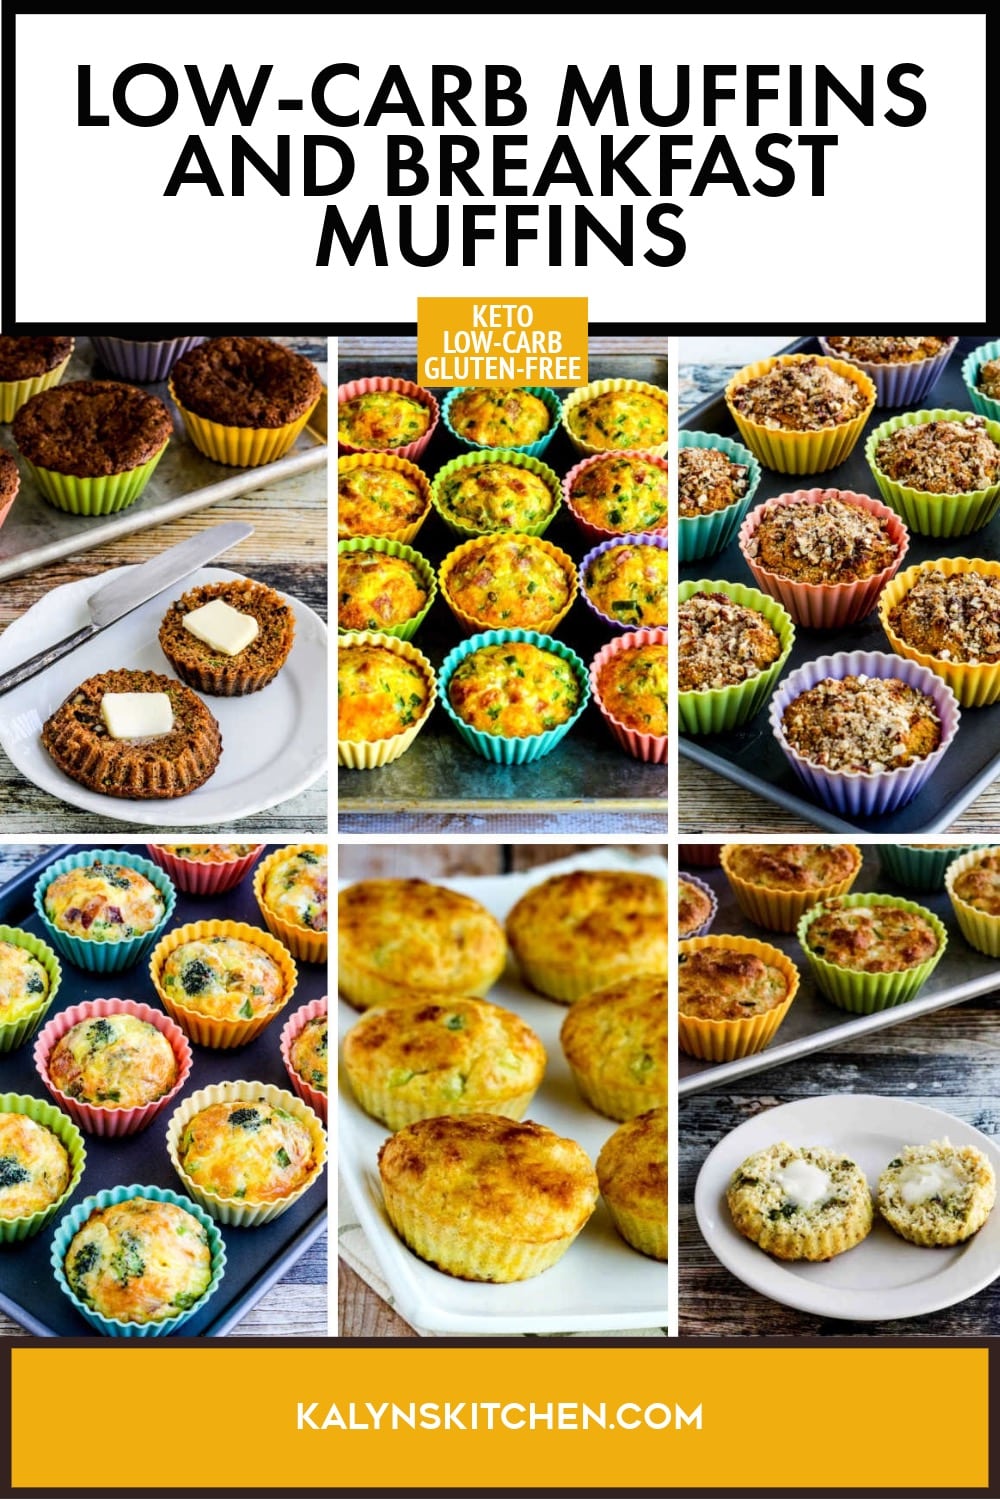 Pinterest image of Low-Carb Muffins and Breakfast Muffins